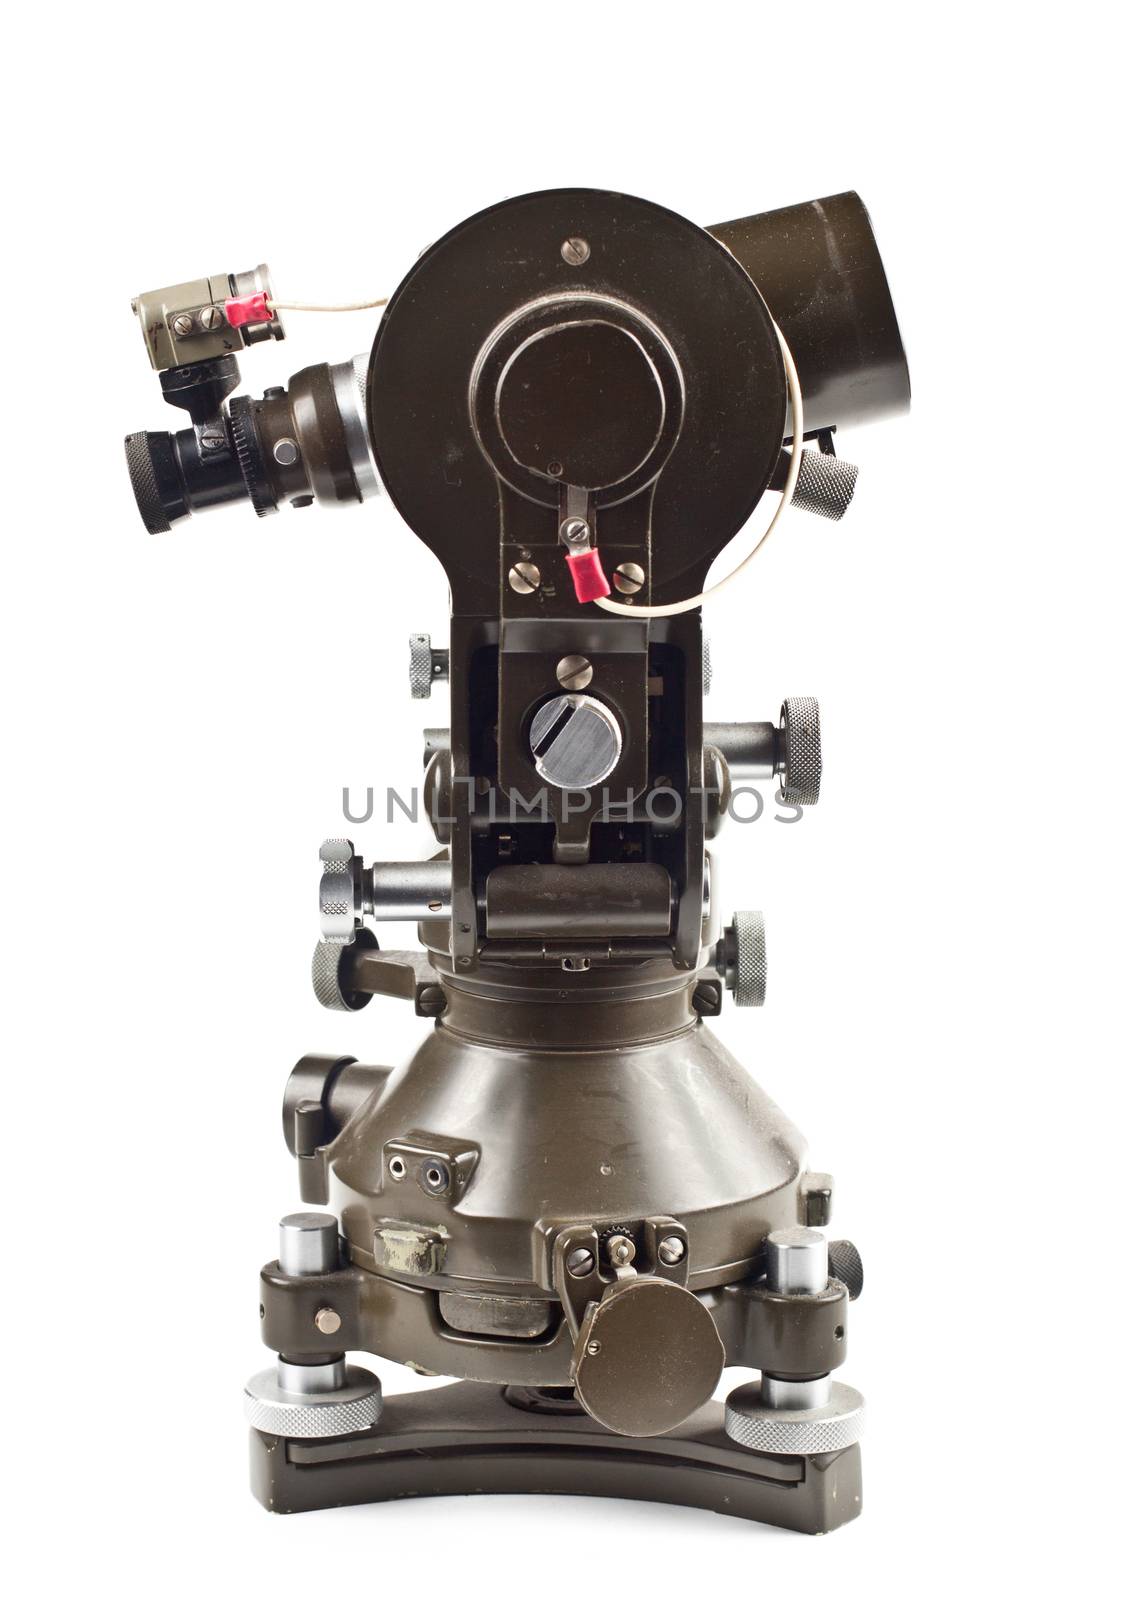 green old theodolite side view isolated on white backhground